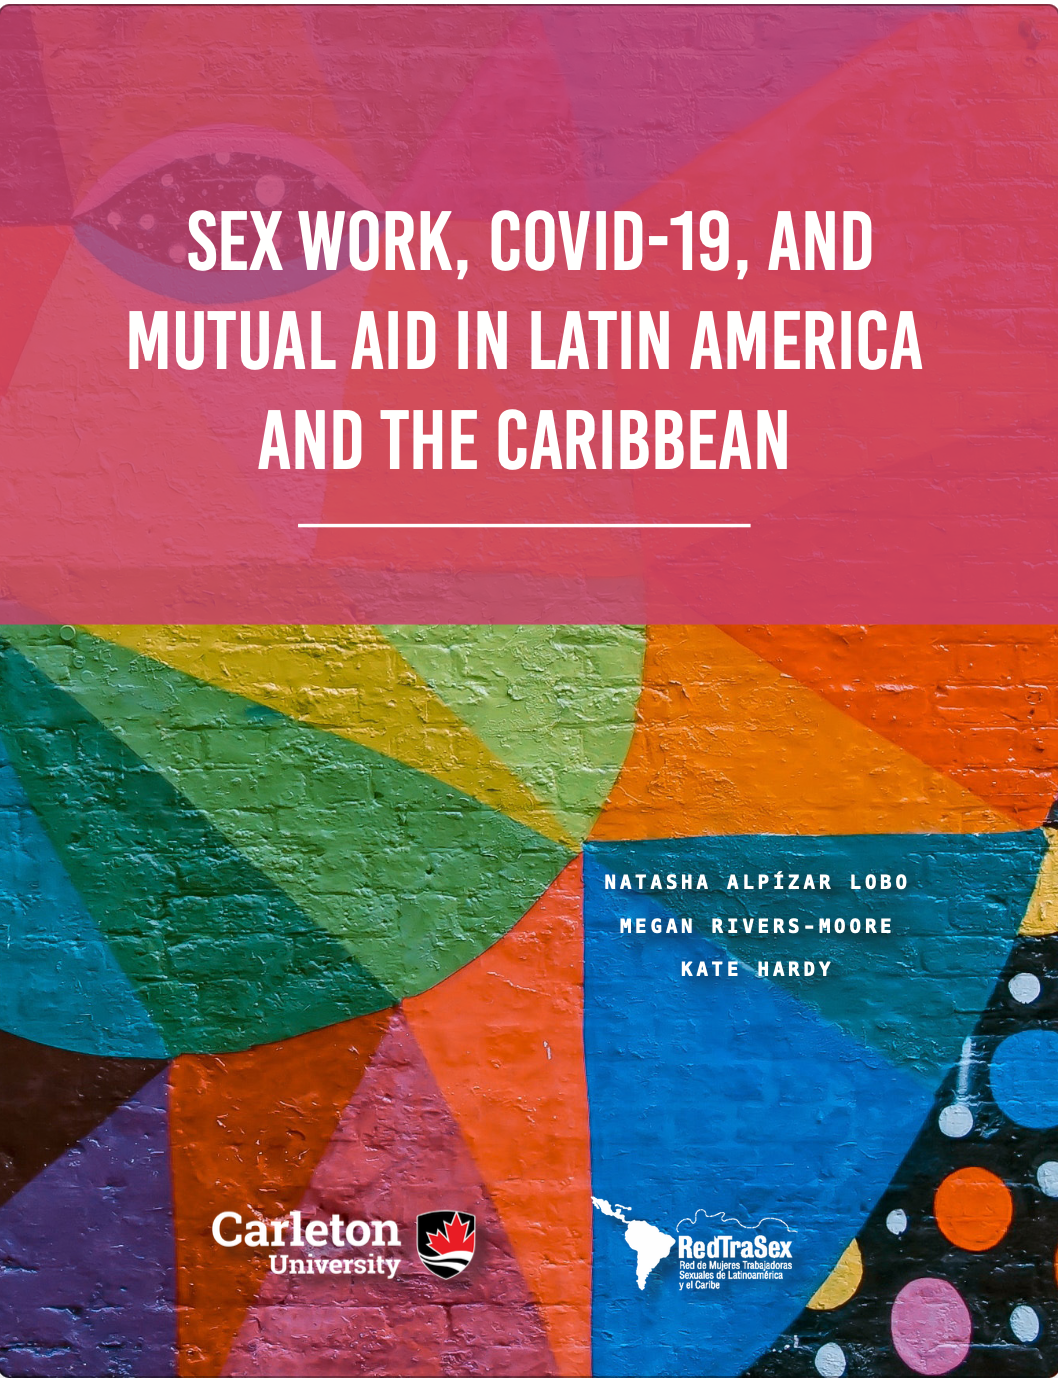 SEX WORK, COVID-19, AND MUTUAL AID IN LATIN AMERICA AND THE CARIBBEAN